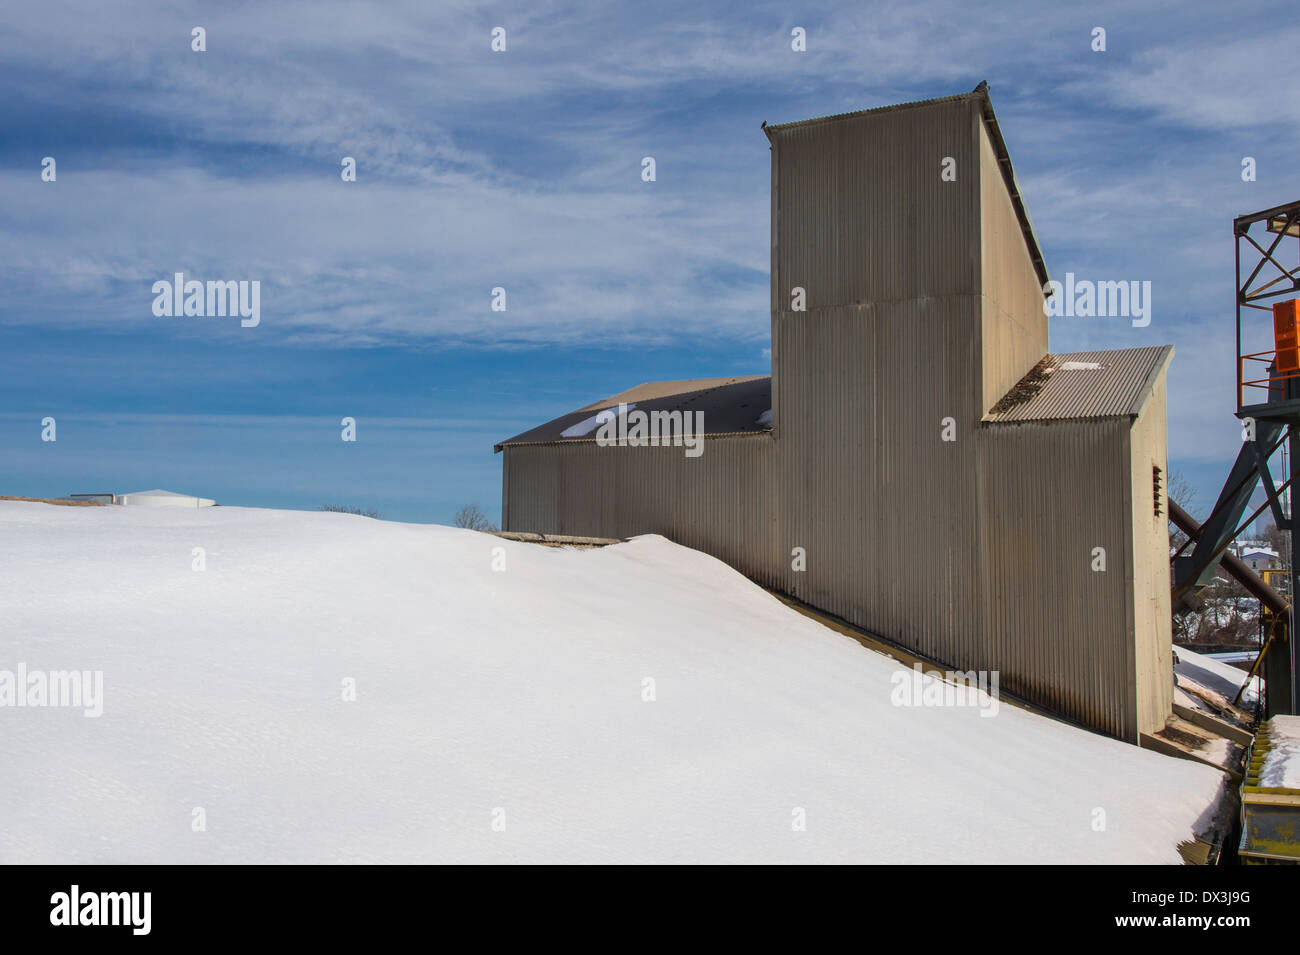 Snow Covered Roof Metal Industrial Building Exterior Stock Photo